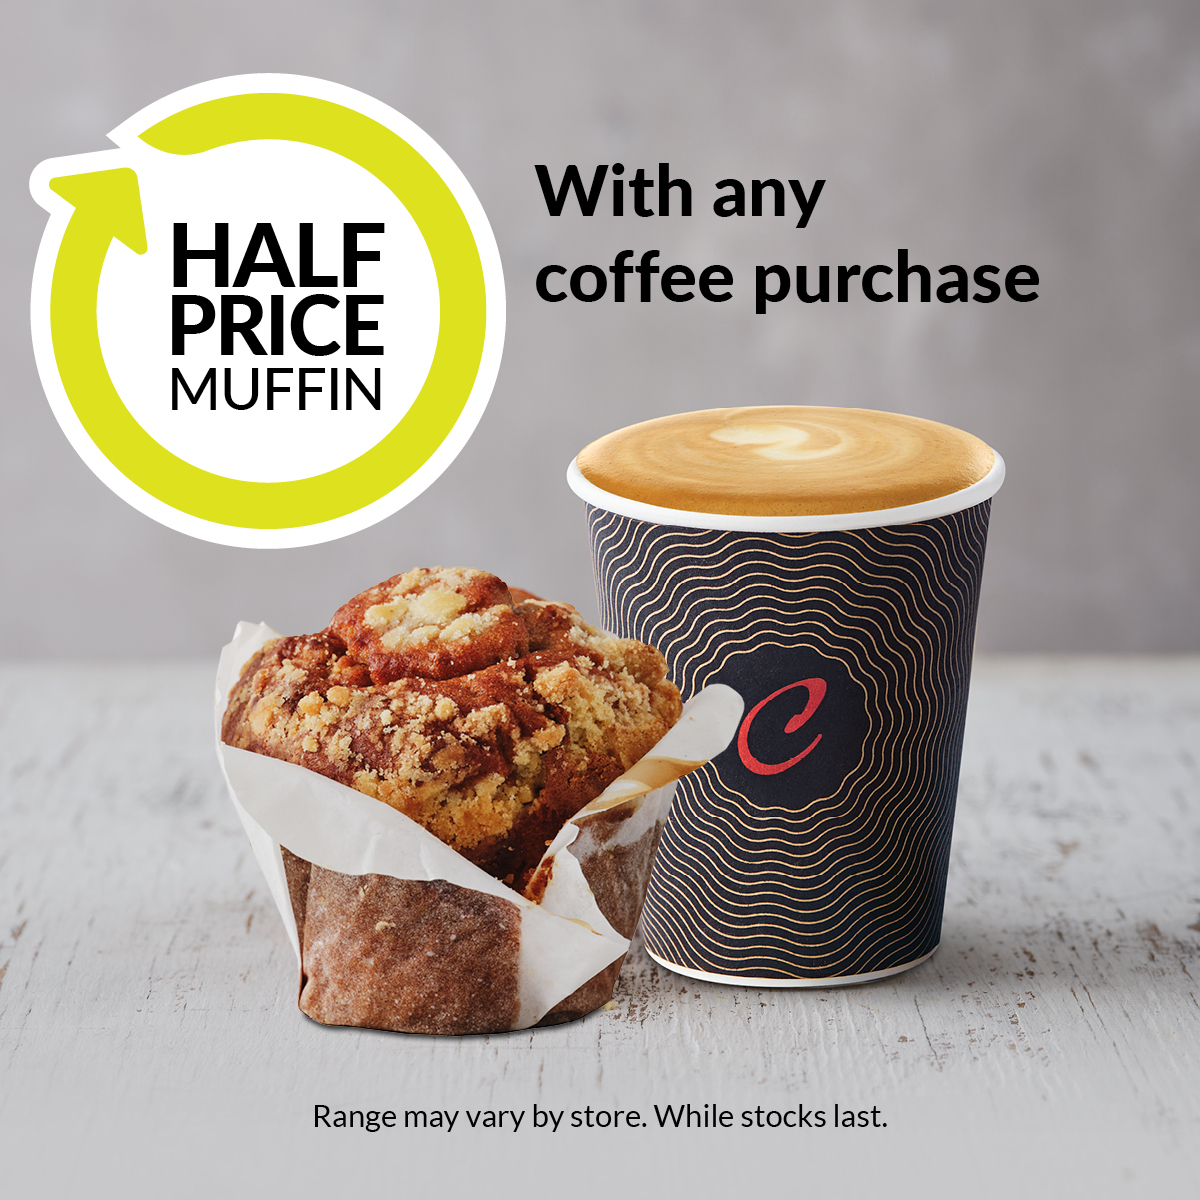 R1 2024-2025 EAT Half Price Muffin with Coffee - Website Specials Tile 500x500px